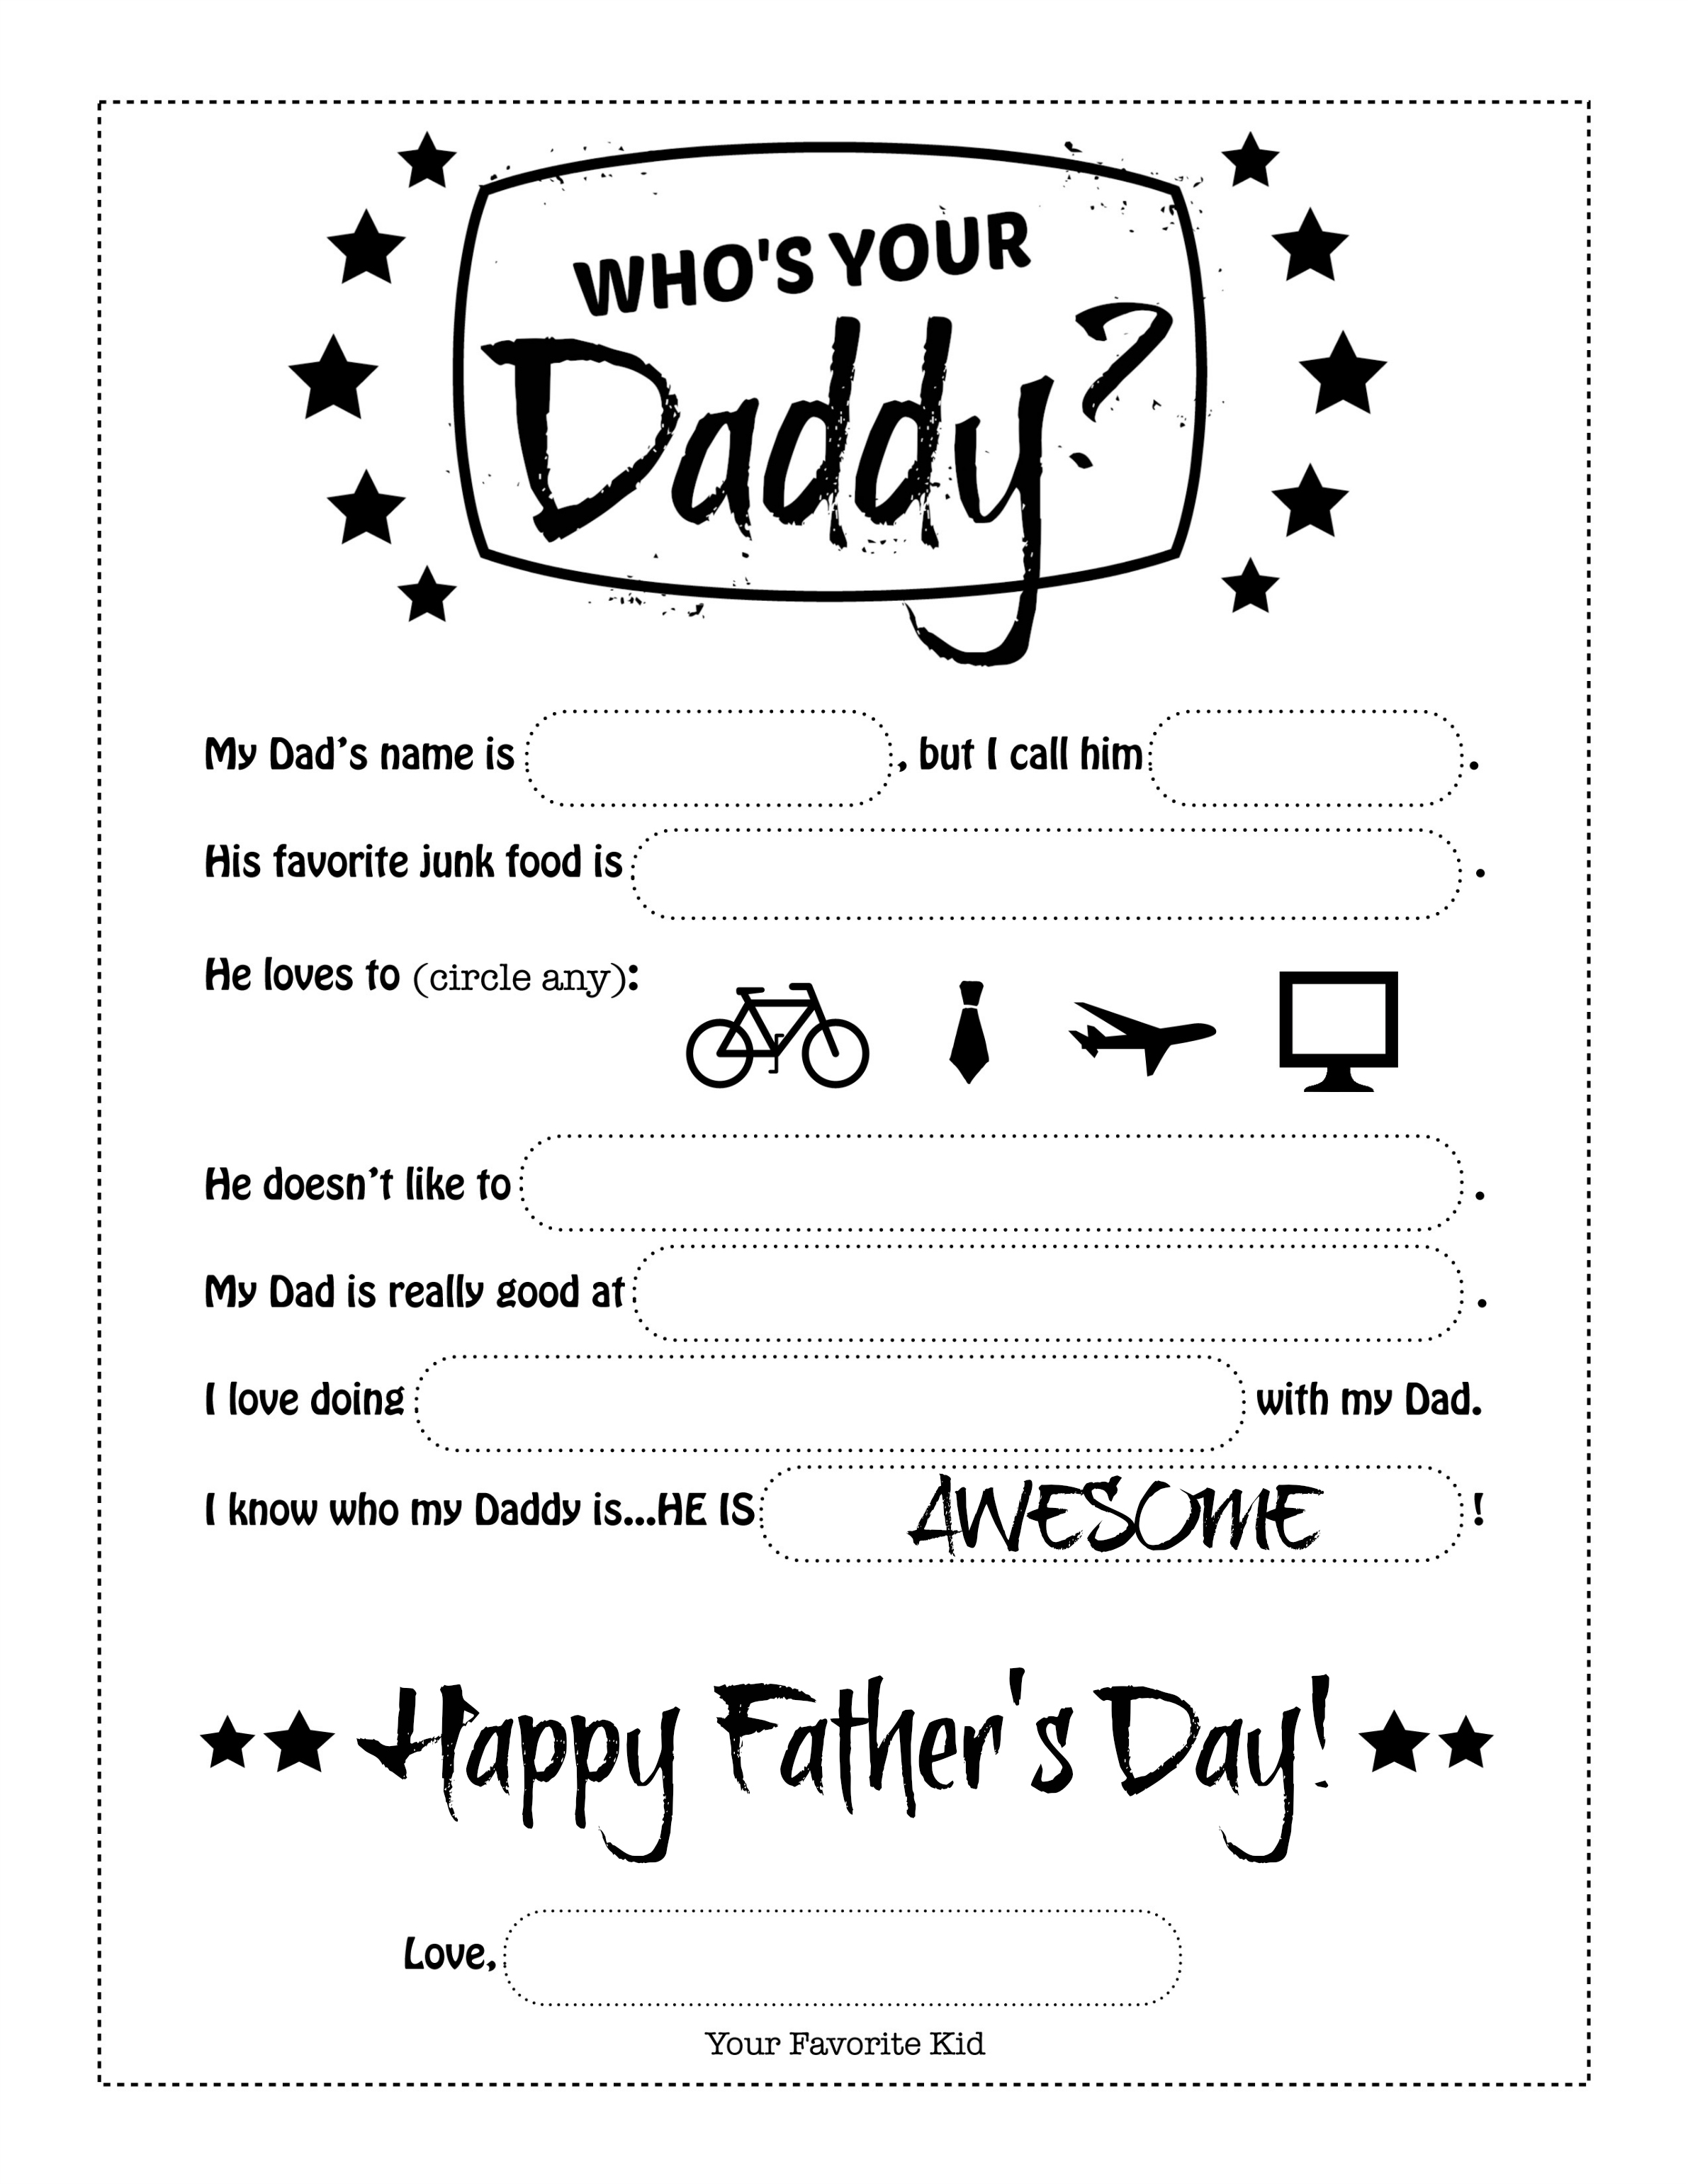 about-my-dad-printable-this-father-s-day-give-dad-a-special-token-of